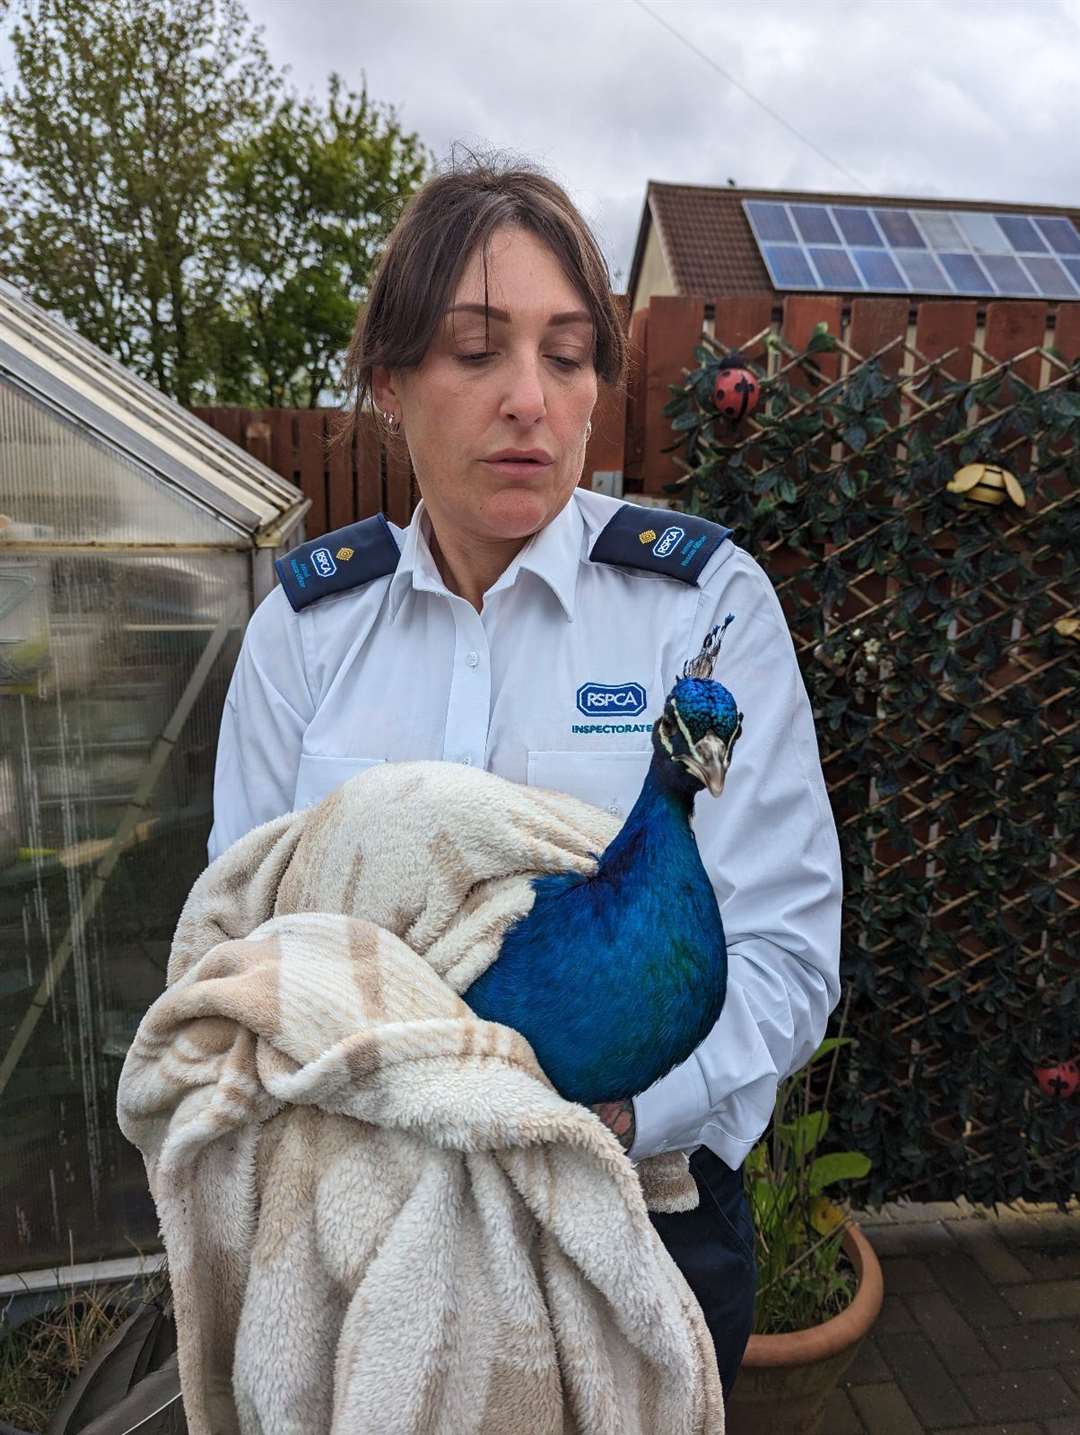 The peacock is currently being looked after at a special animal rescue centre (RSPCA/PA)